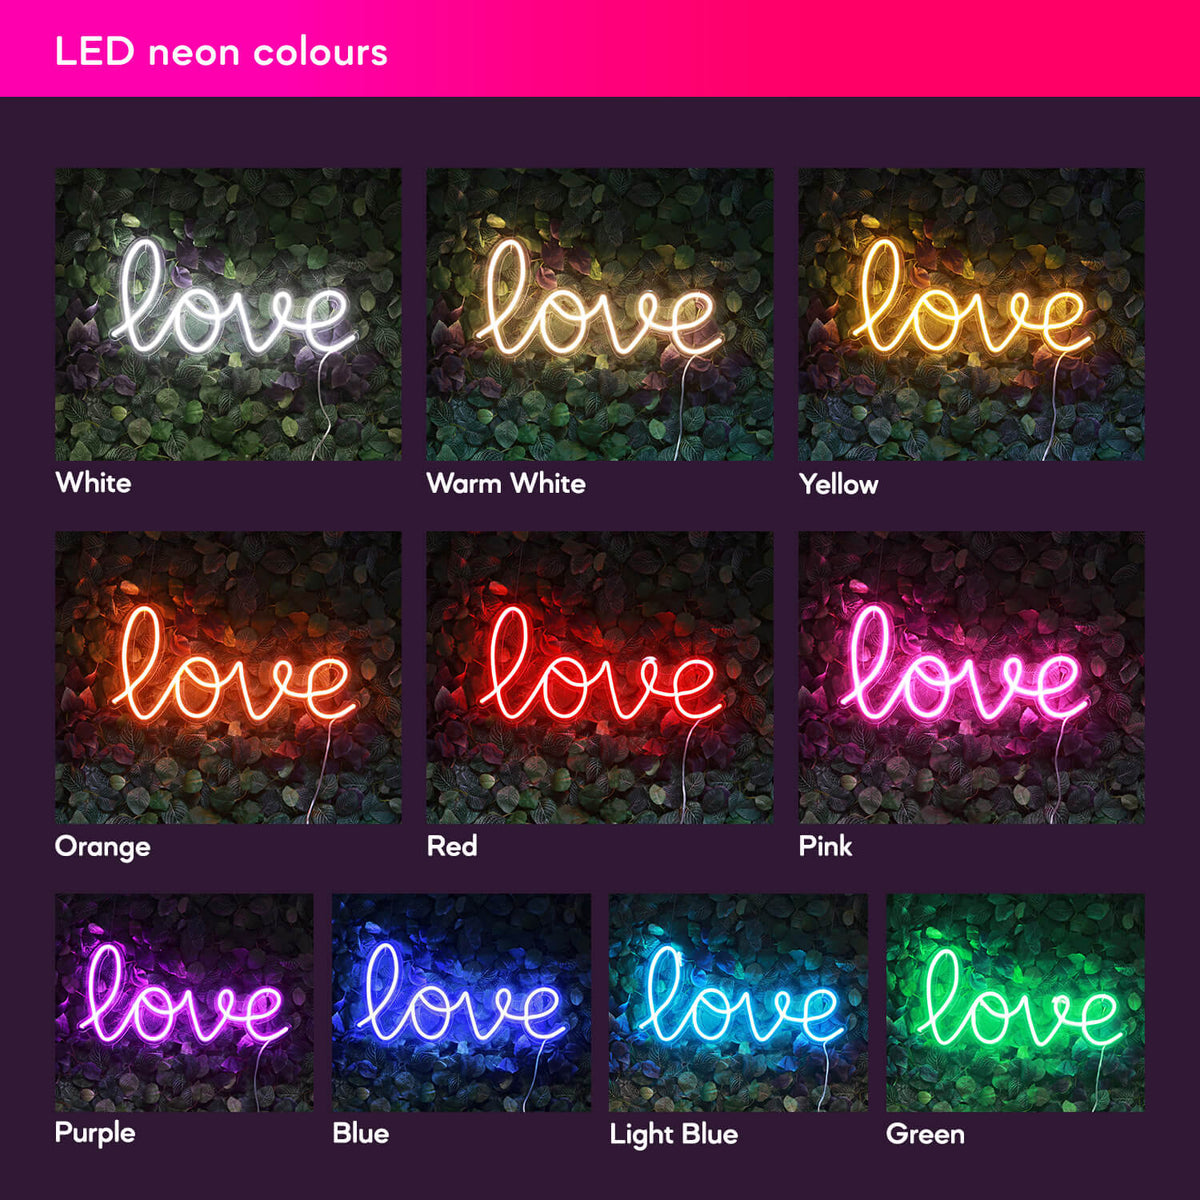 Colour options for neon signs